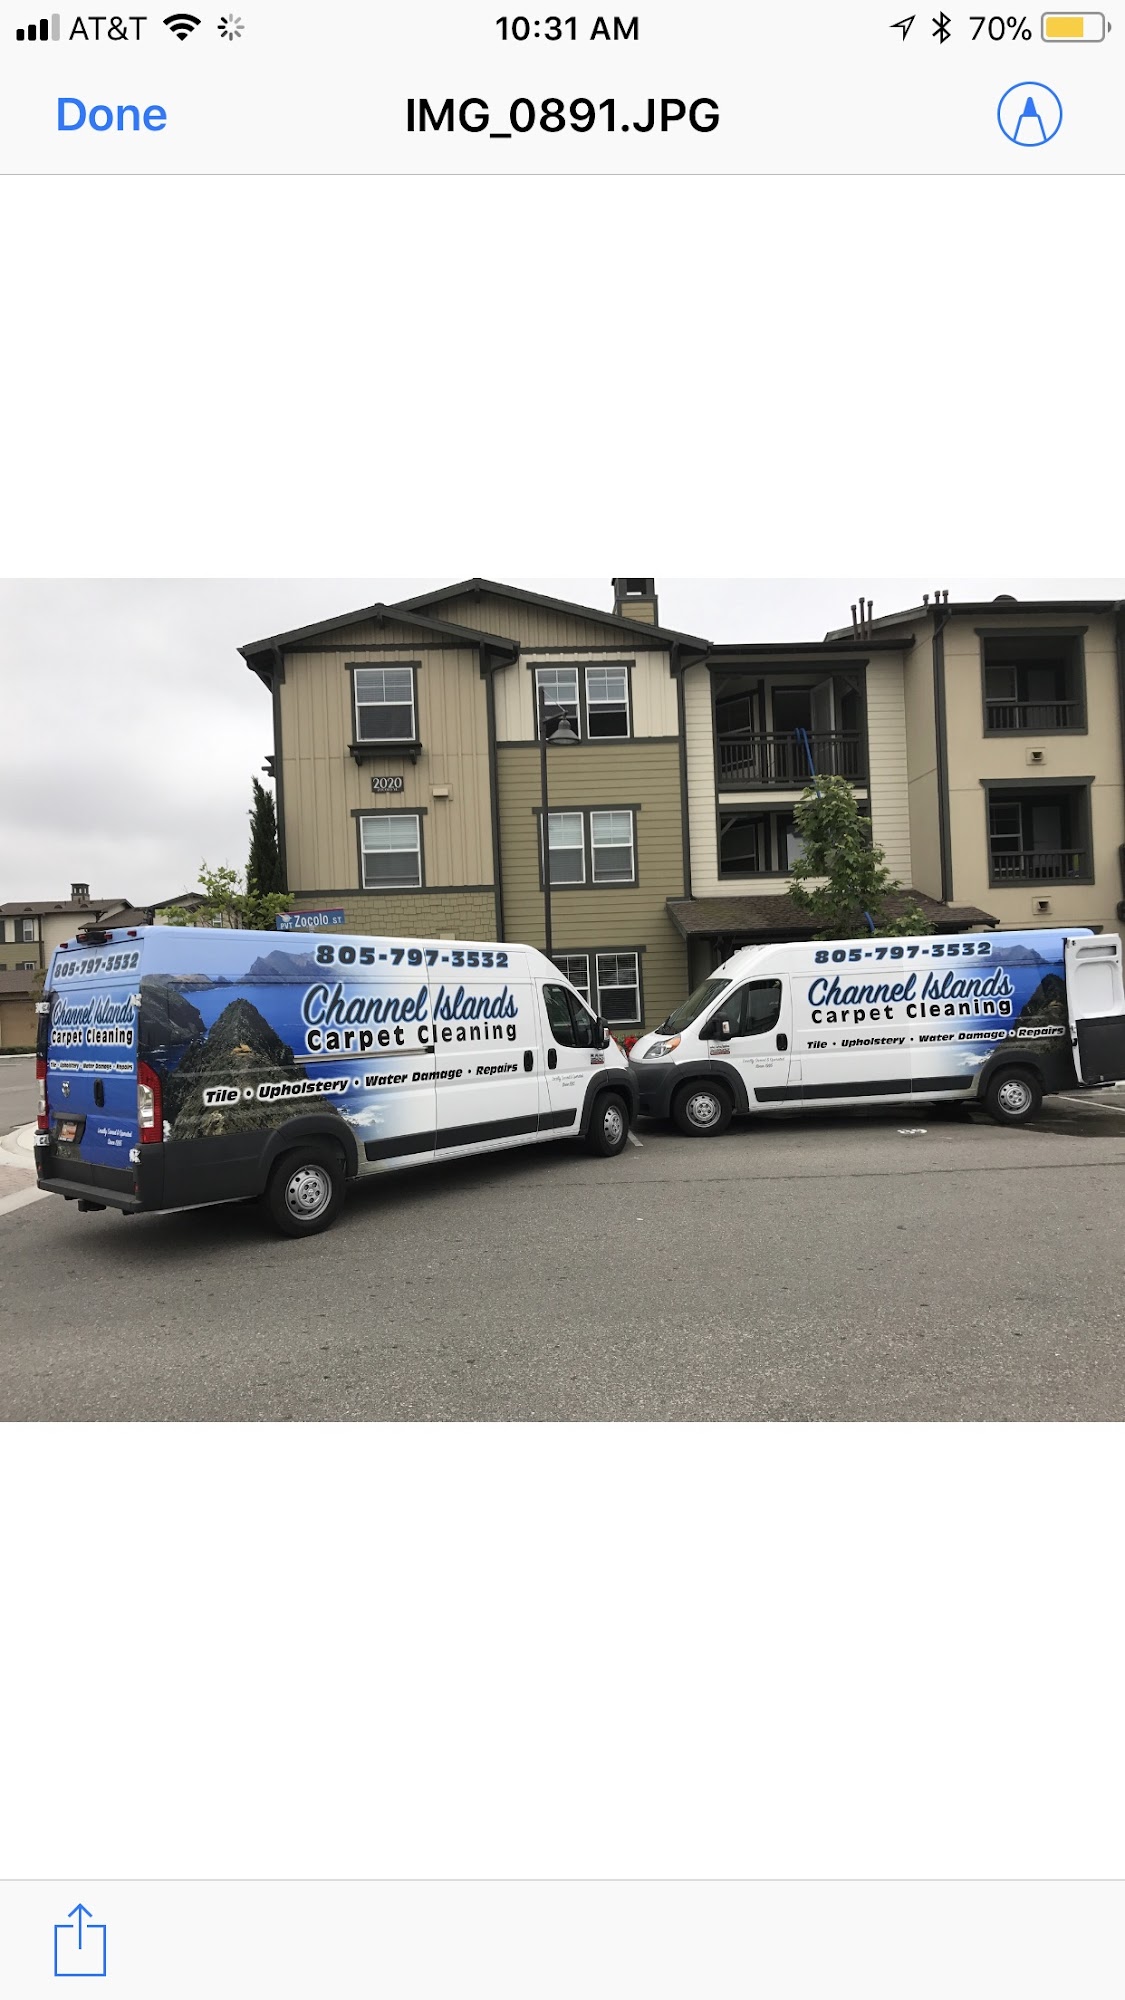 Channel Islands Carpet Cleaning